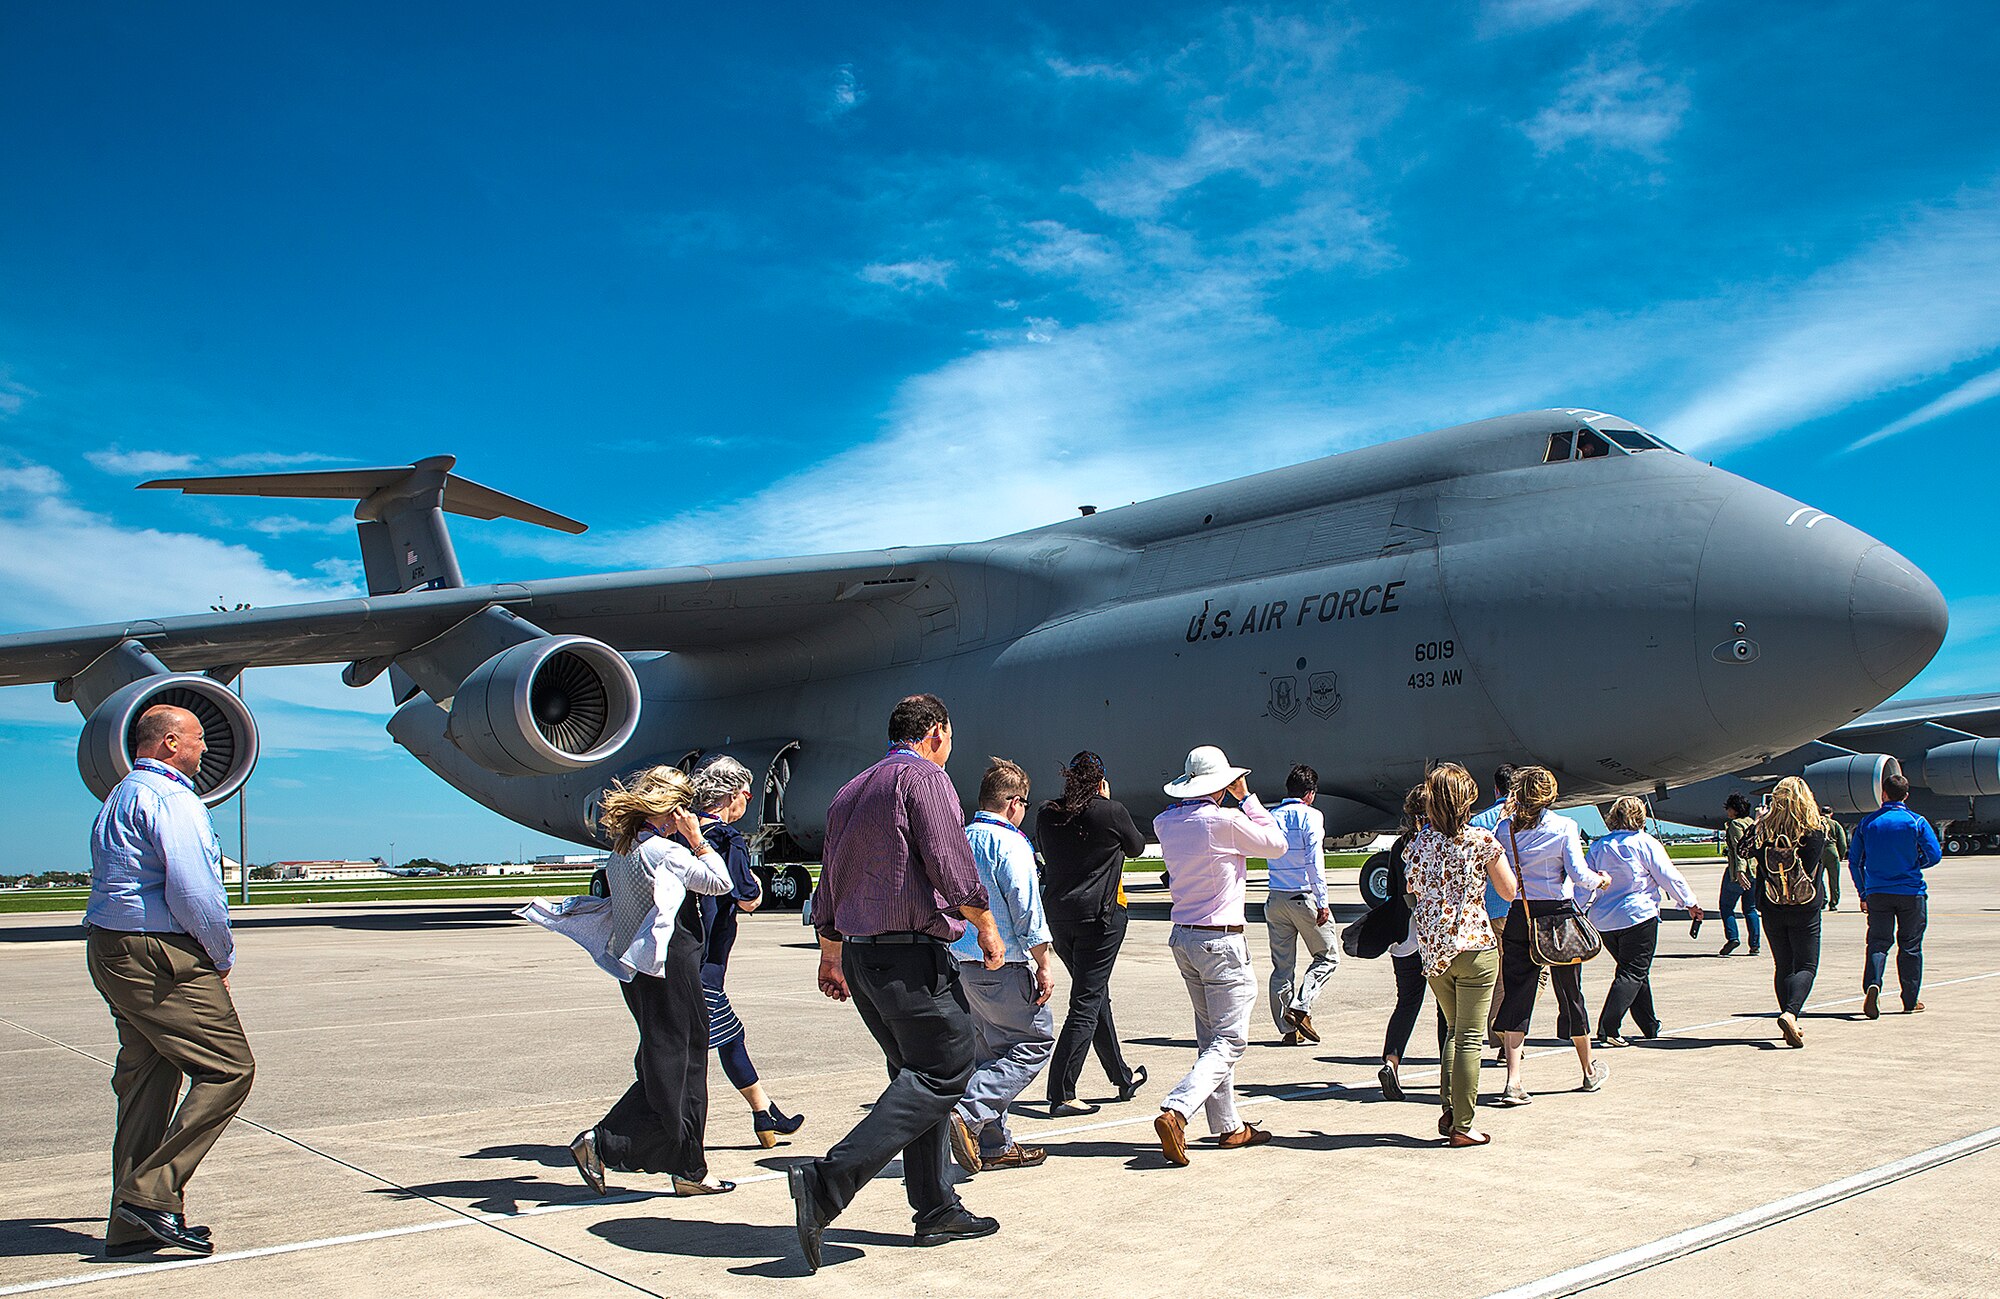 Civic Leaders from the 403rd Wing, Keesler Air Force Base, Mississippi tour a C-5M Super Galaxy aircraft March 23, 2017 at Joint Base San Antonio-Lackland, Texas. The two-day visit included a tour of the C-5M Super Galaxy aircraft; a walk through of the 733rd Training Squadron, reception with the Greater San Antonio Chamber of Commerce, 433rd Maintenance Group engine and structural shop; U.S. Army Medical Department Museum; The Center for the Intrepid; and a tour of the U.S. Army Combat Medic Training. (U.S. Air Force photo by Benjamin Faske)